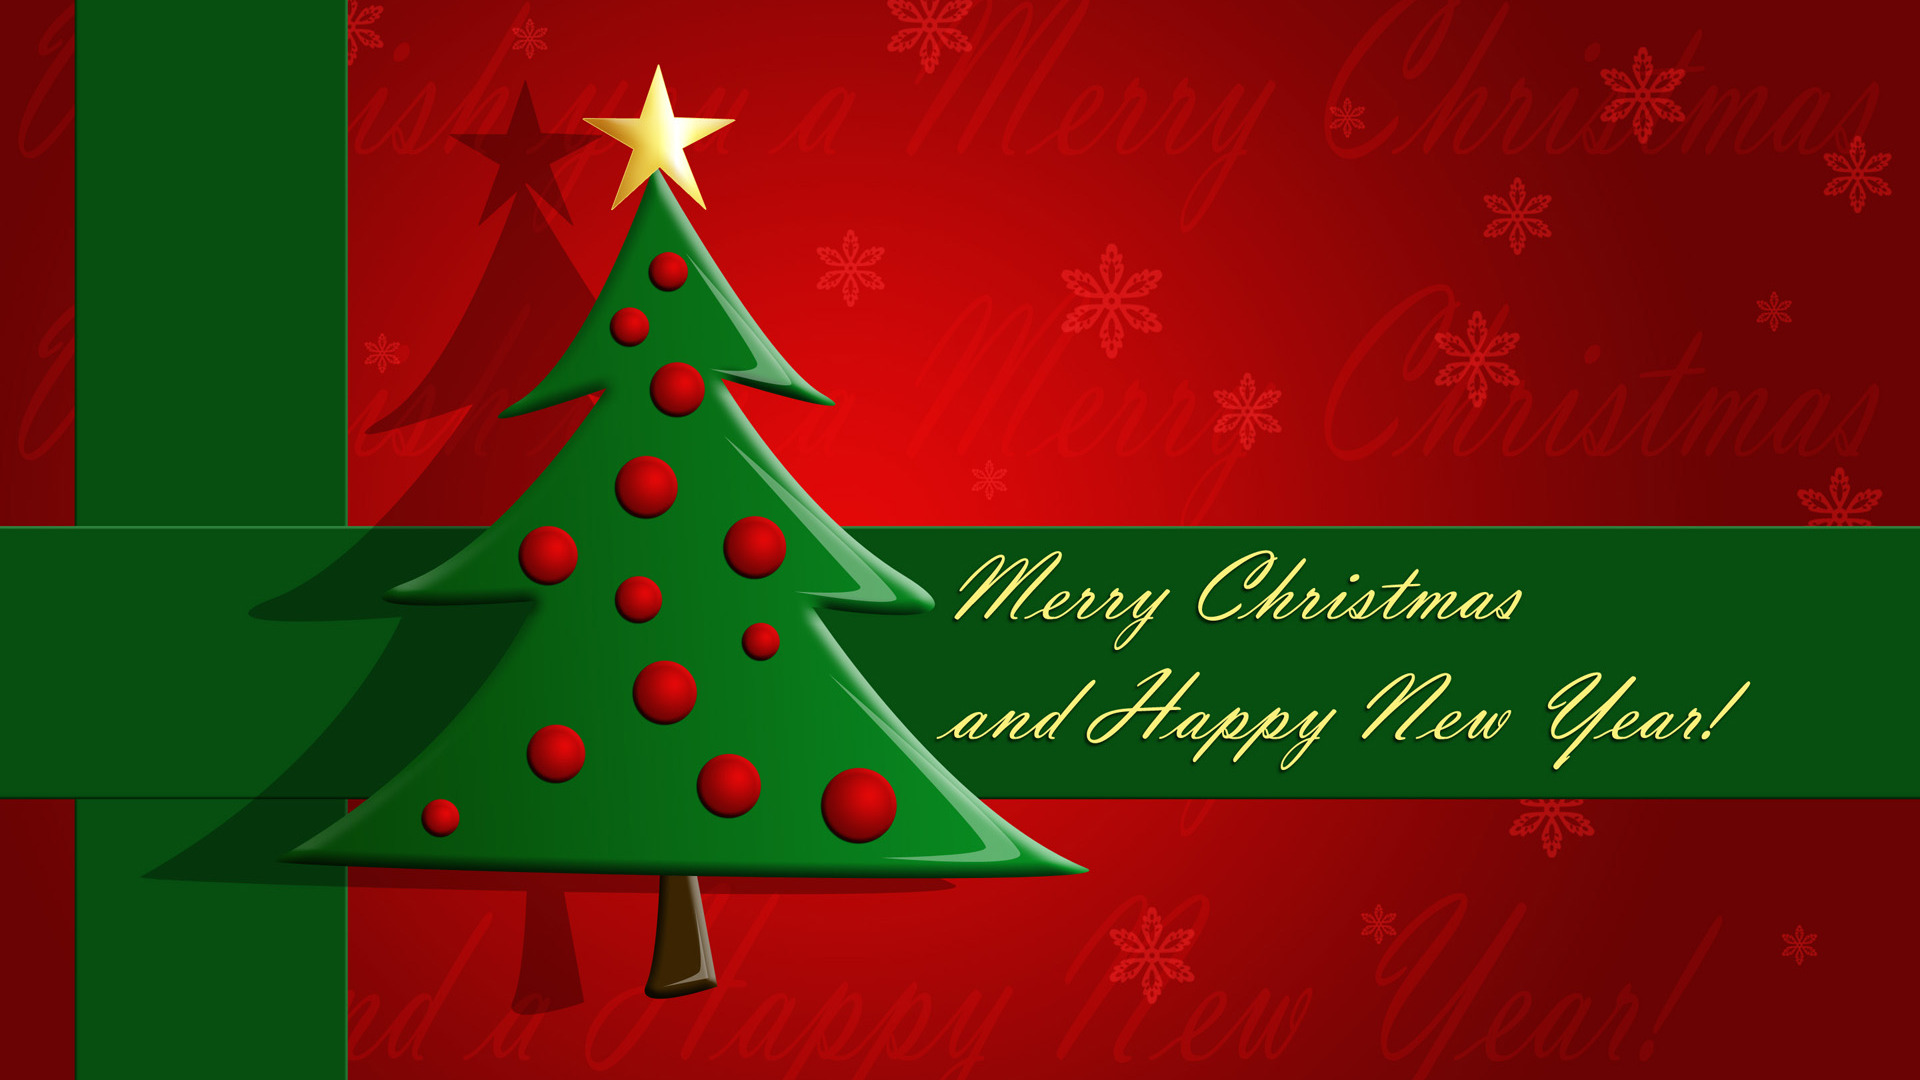 Merry Christmas And Happy New Year Tree Wishes Wallpaper Image